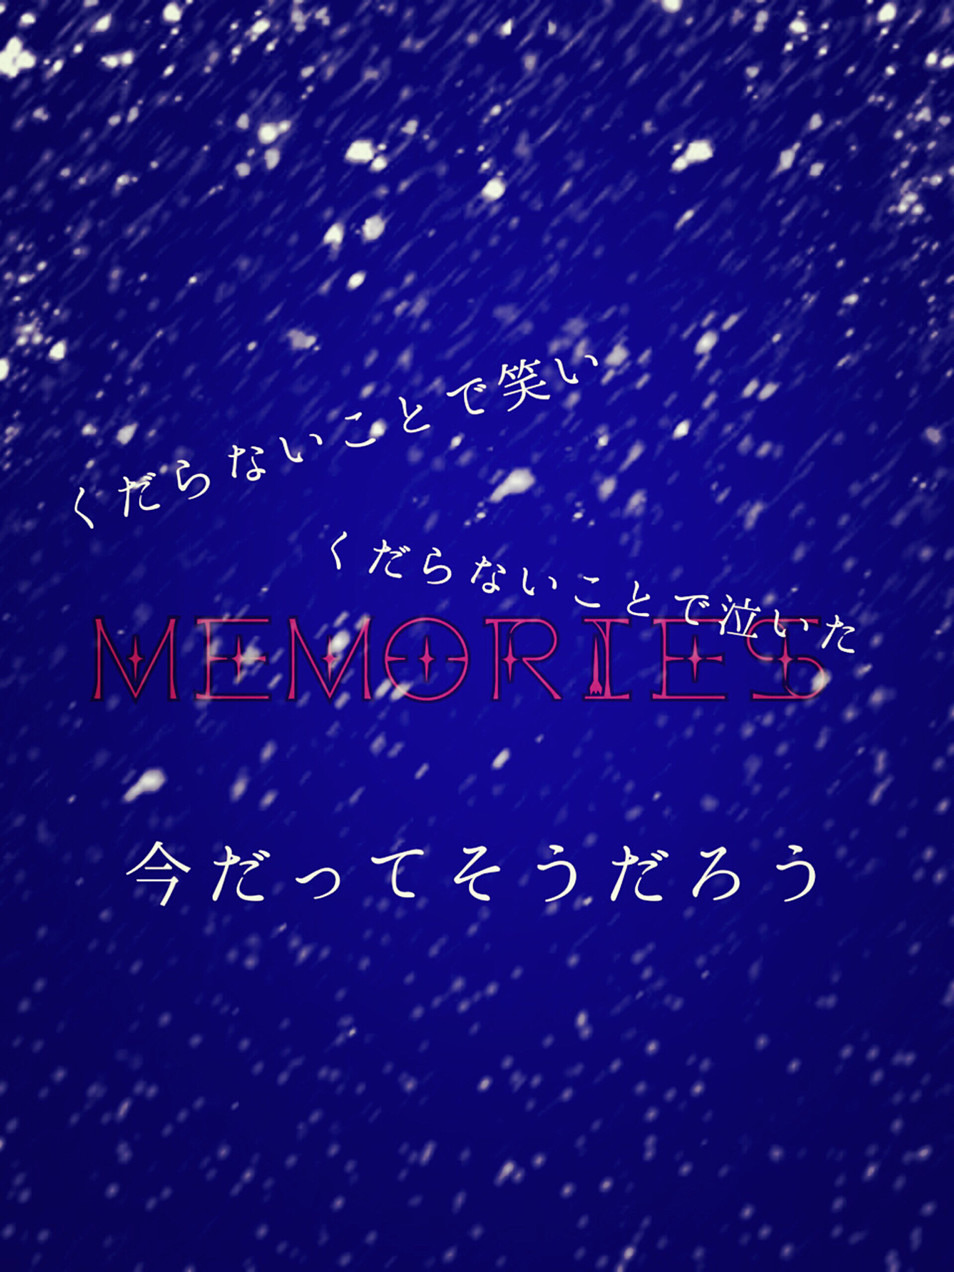 Man With A Mission Memories 完全無料画像検索のプリ画像 Bygmo